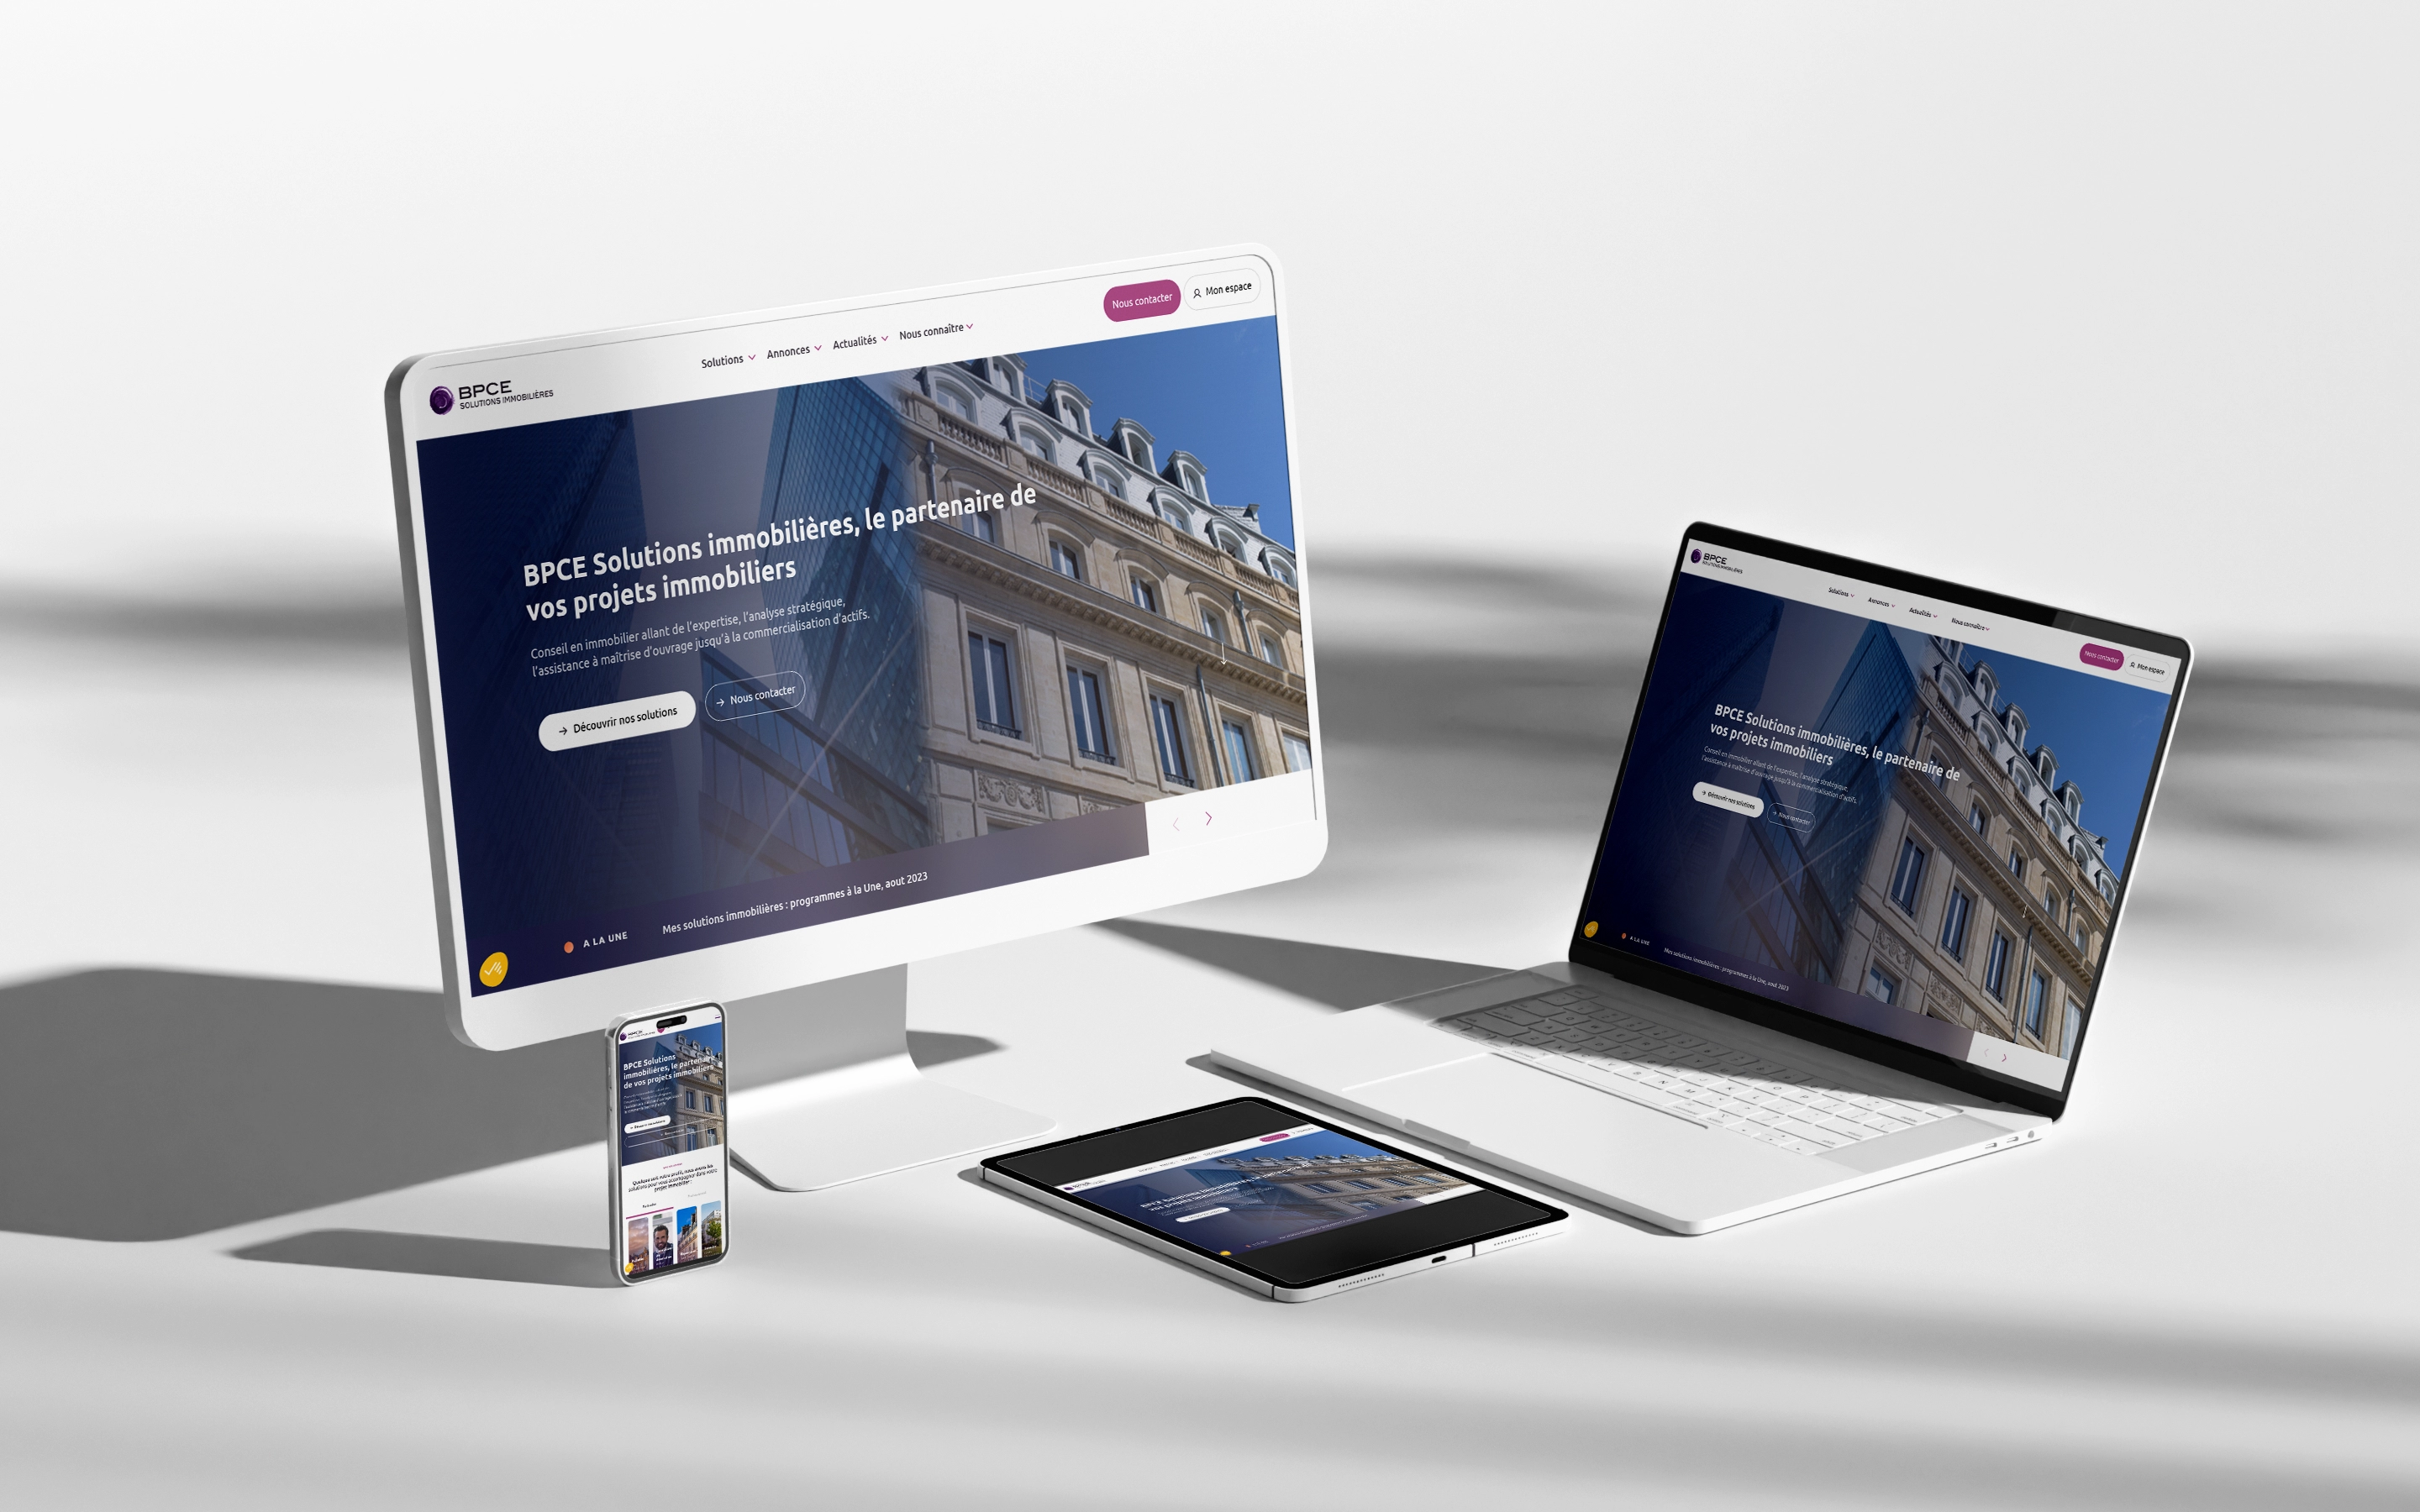 Mock-up deux https://solutionsimmobilieres.bpce.fr